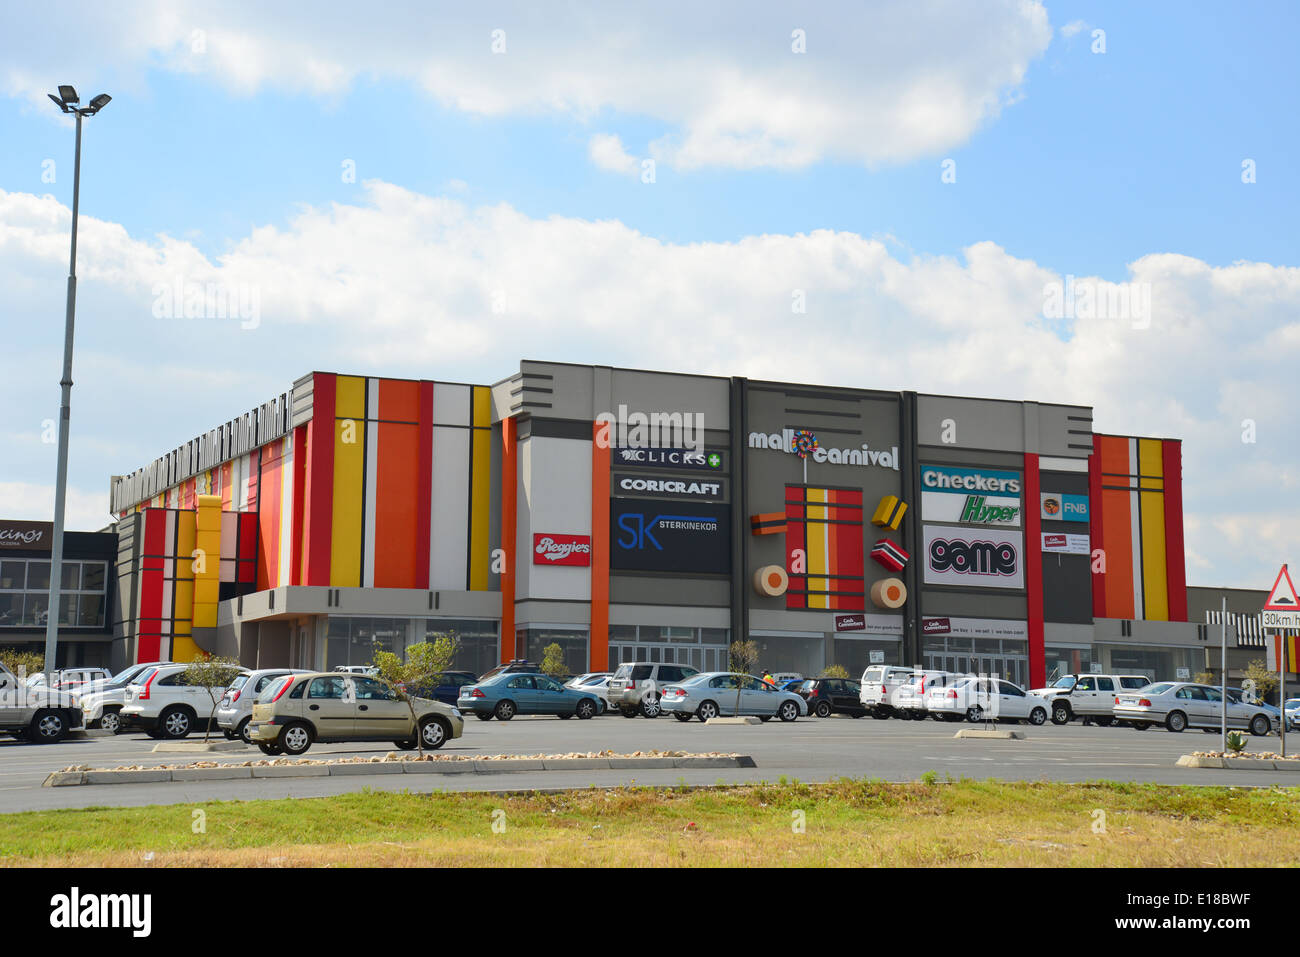 Carnival Mall shopping centre, Brakpan, East Rand, Greater Johannesburg, Gauteng Province, Republic of South Africa Stock Photo